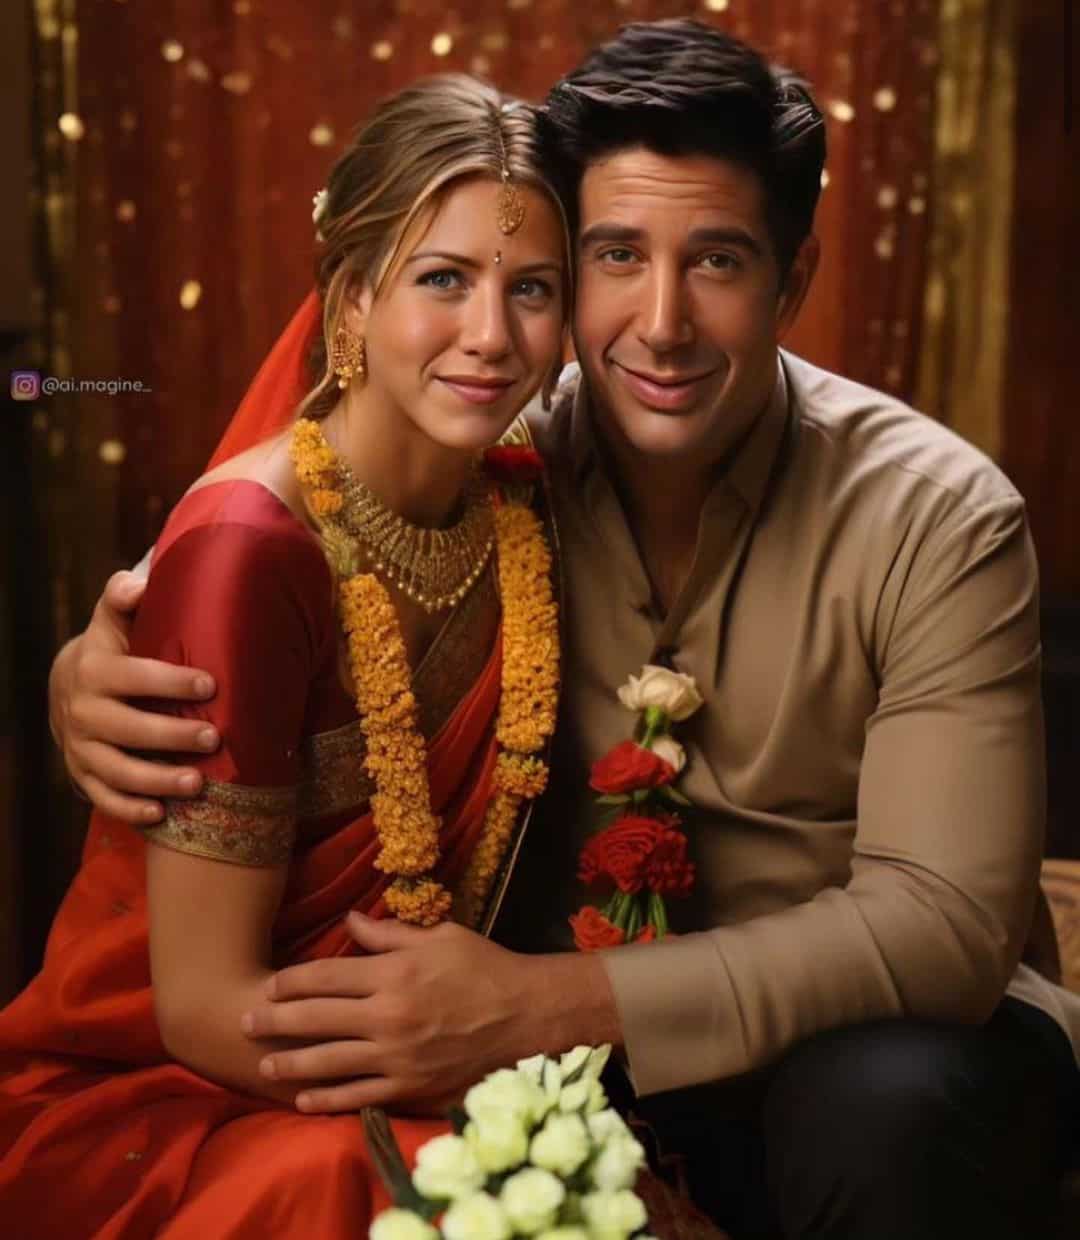 The Indian version of Ross and Rachel!